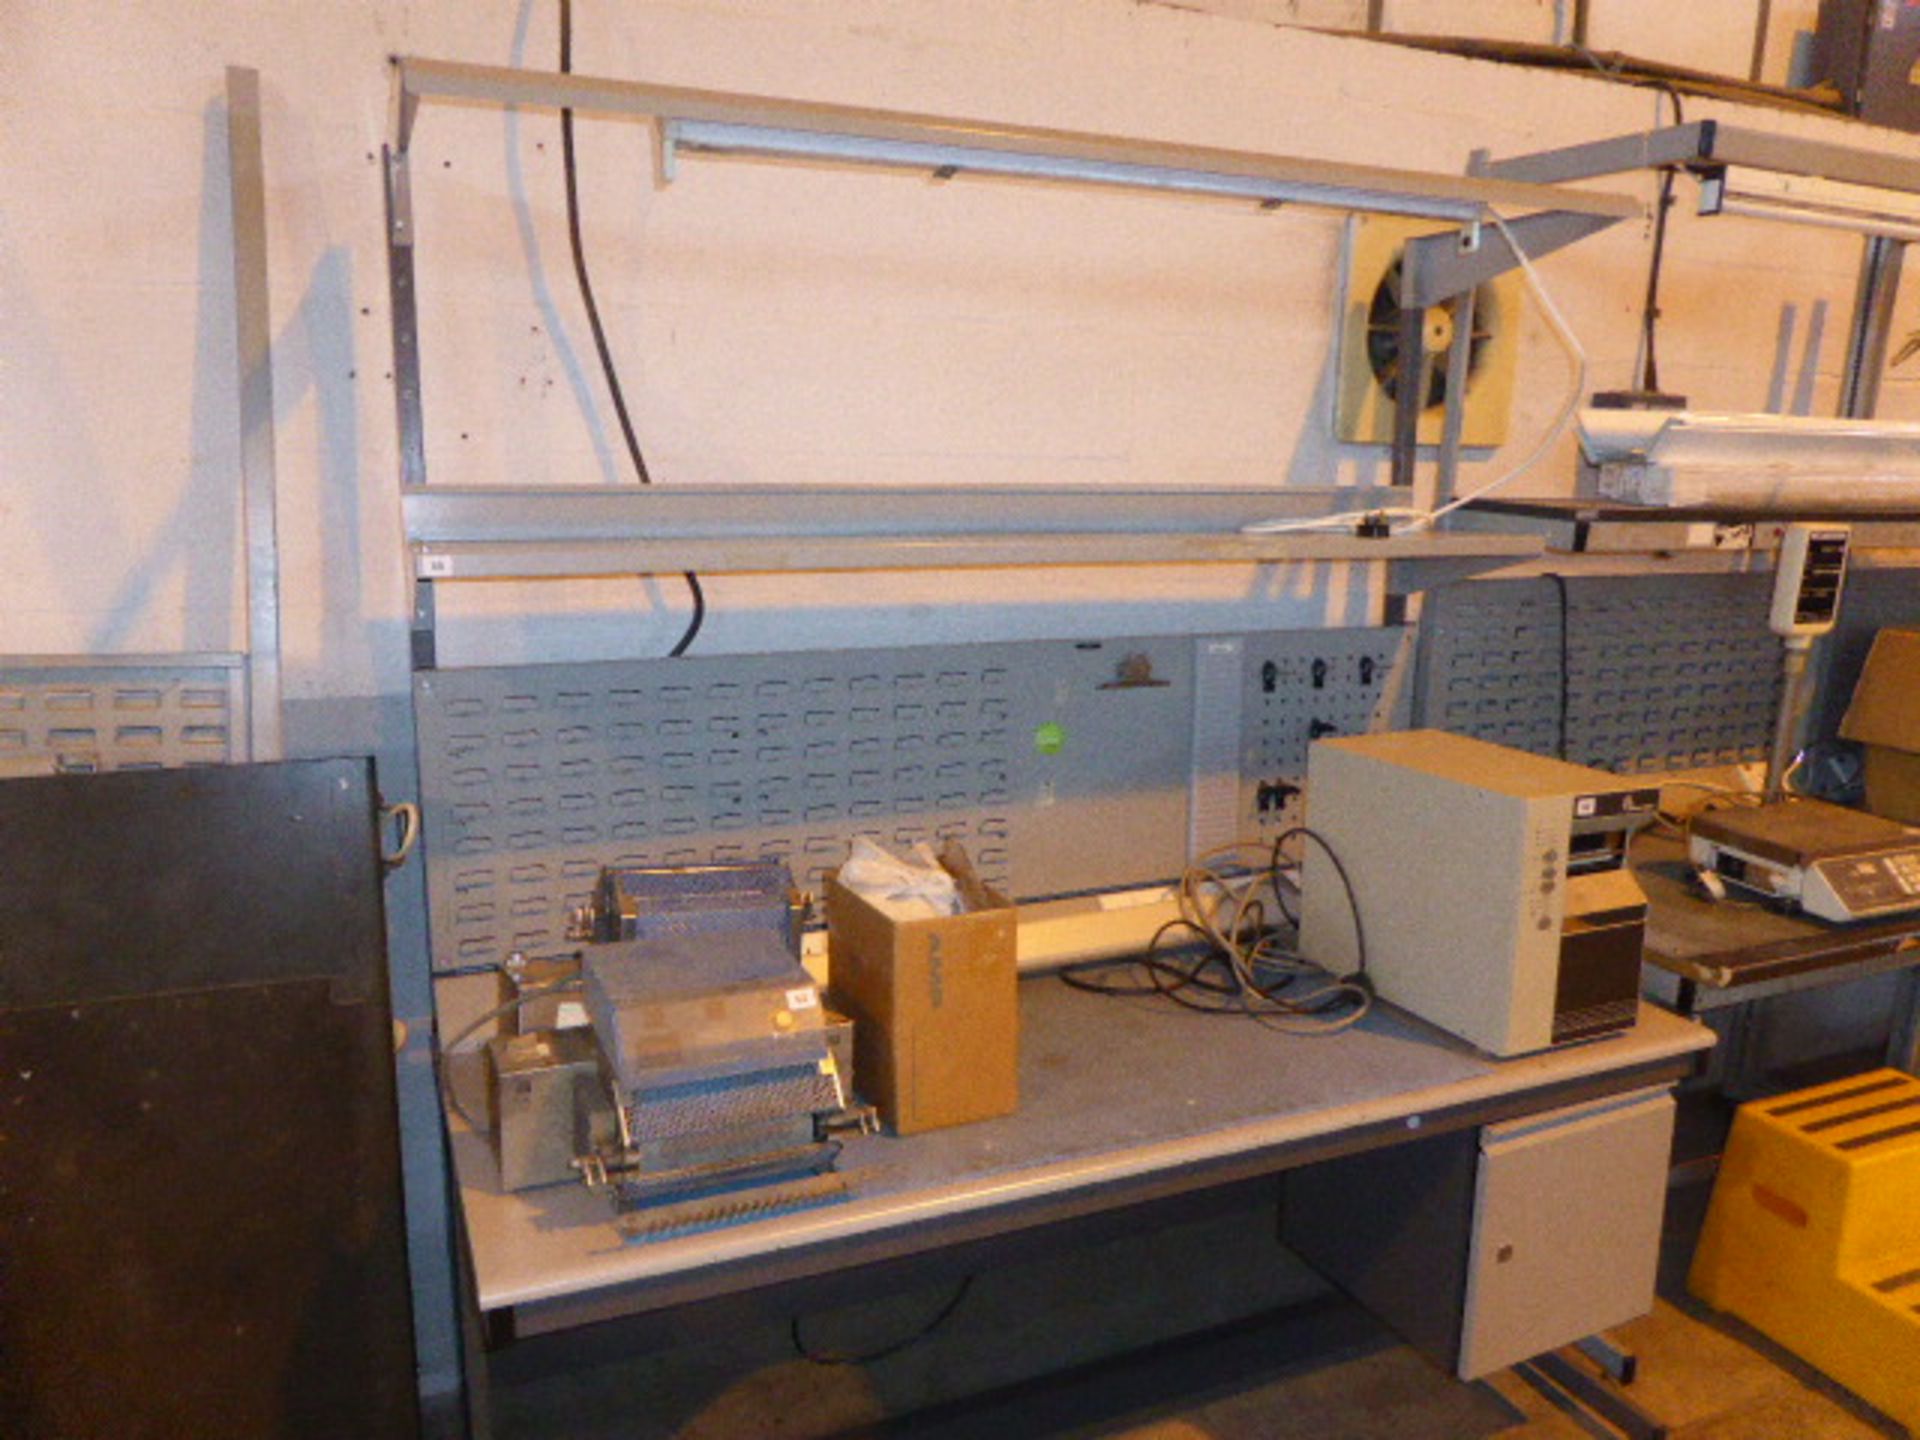 3 electronic engineers test benches together with a similar disassembled unit, 2 cherry pedestals